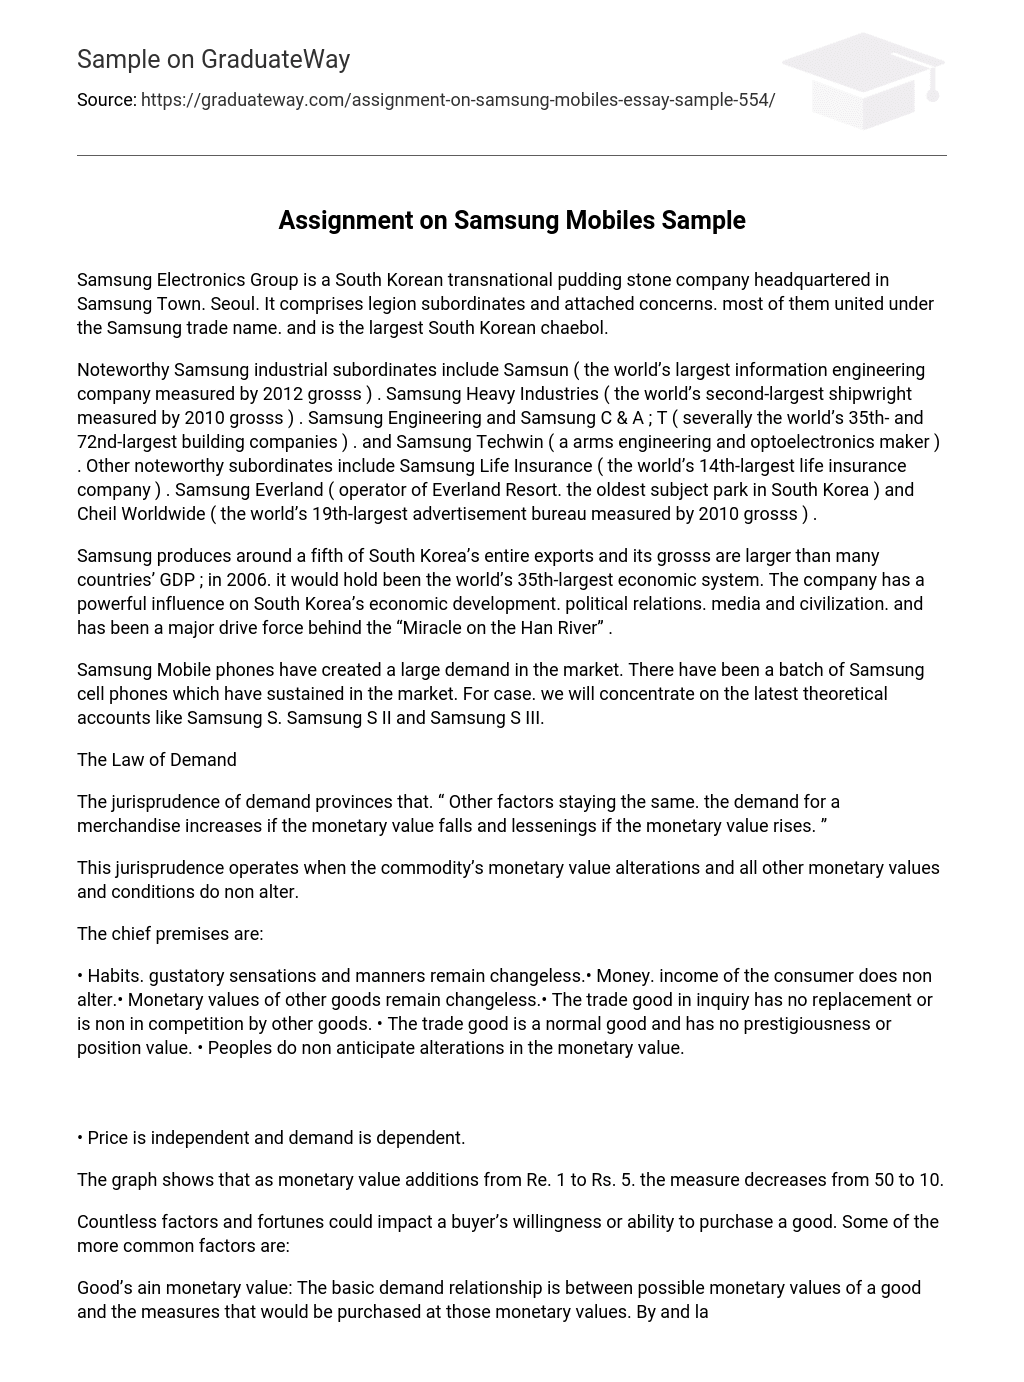 samsung vs iphone essay 2 pages